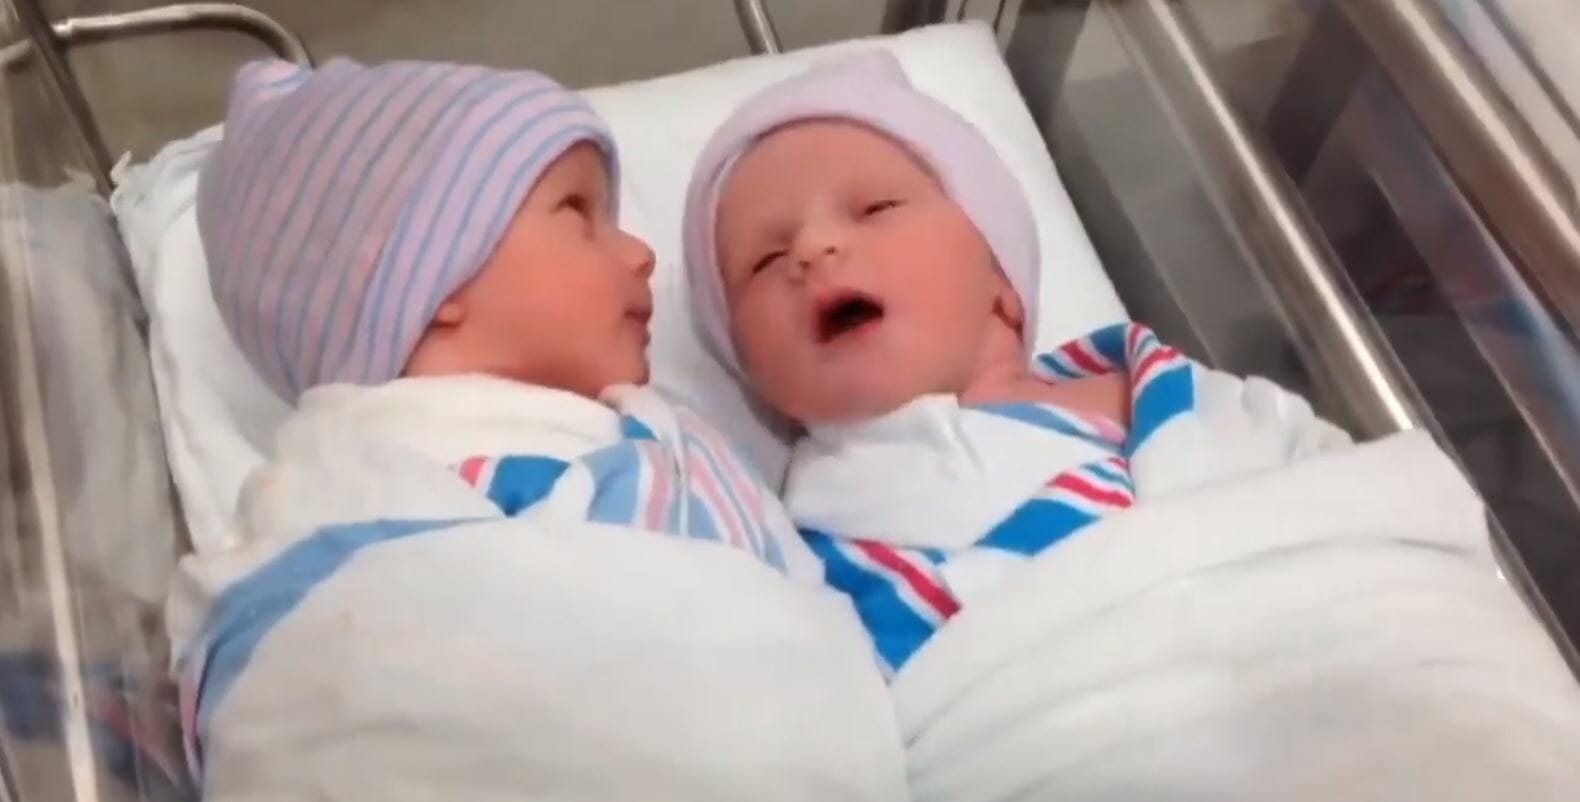 Mother started taking pictures of her twins in the hospital, then noticed an unexpected detail and immediately froze